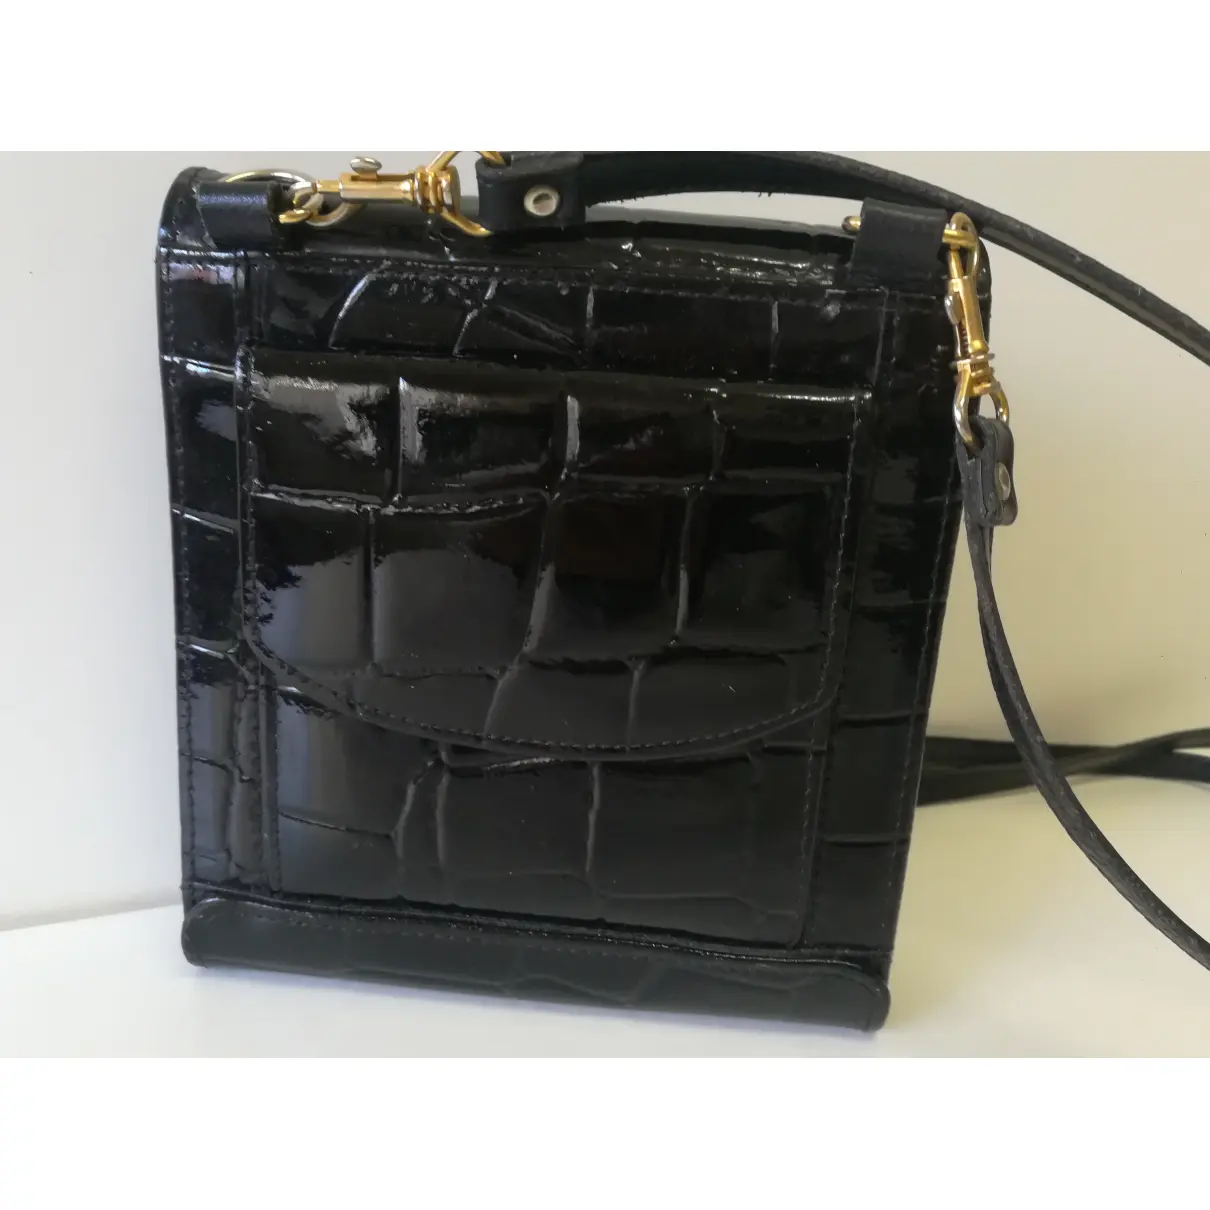 Patent leather clutch bag Gianni Versace - Vintage